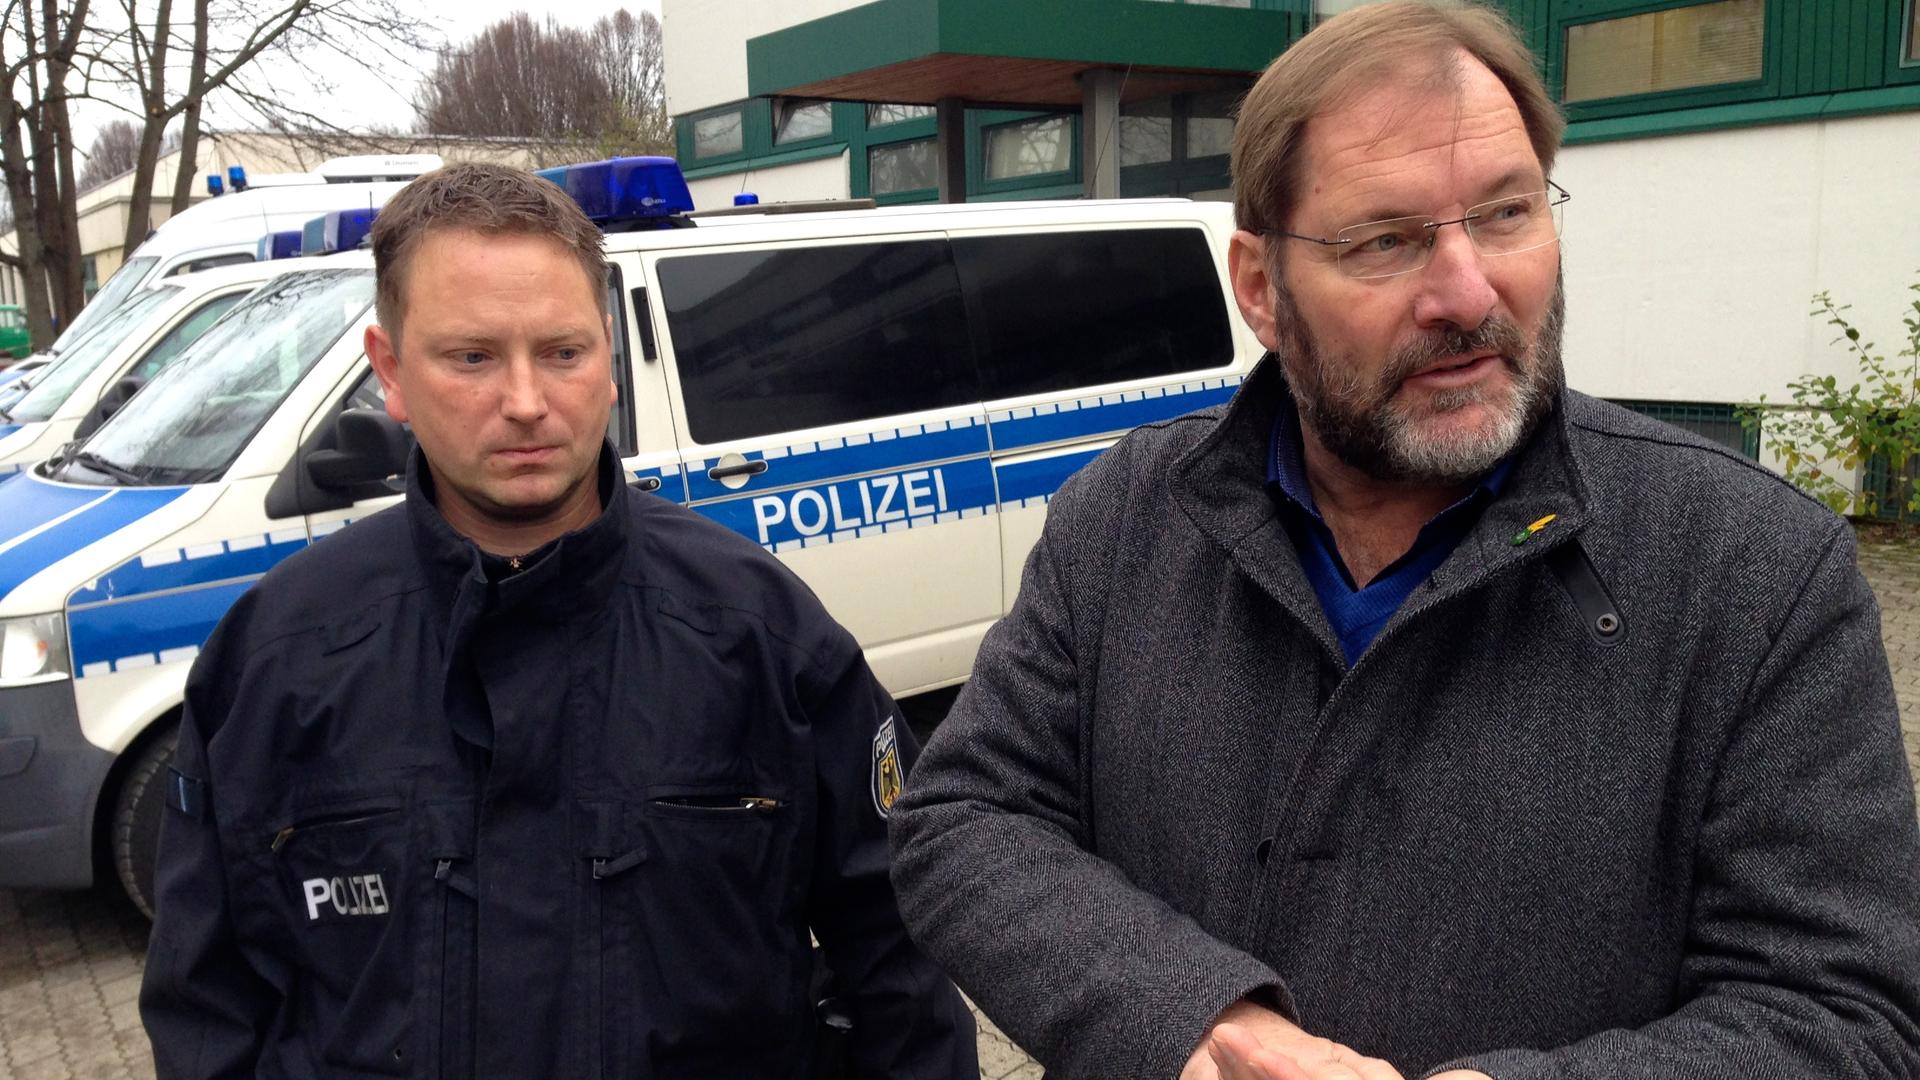 Mark Matthies (left) is with the German national police and Jörg Radek is with the national police union.